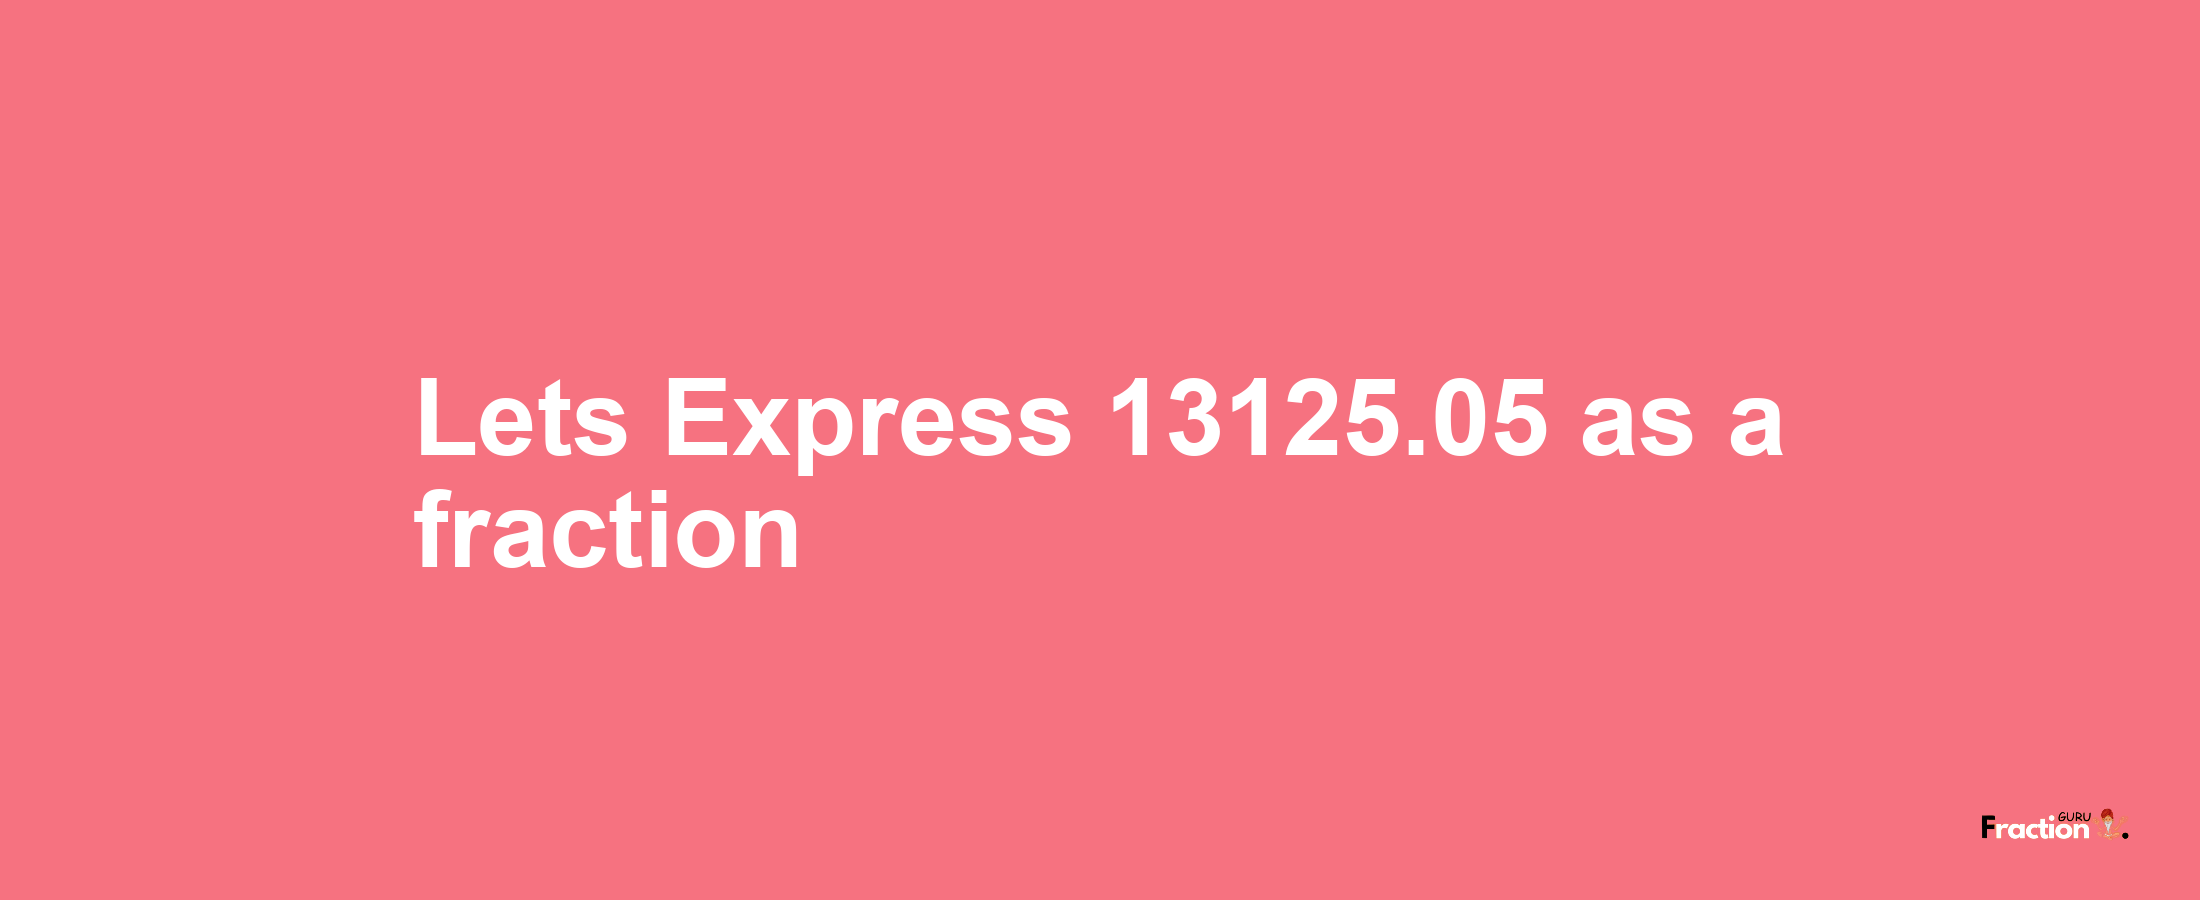 Lets Express 13125.05 as afraction